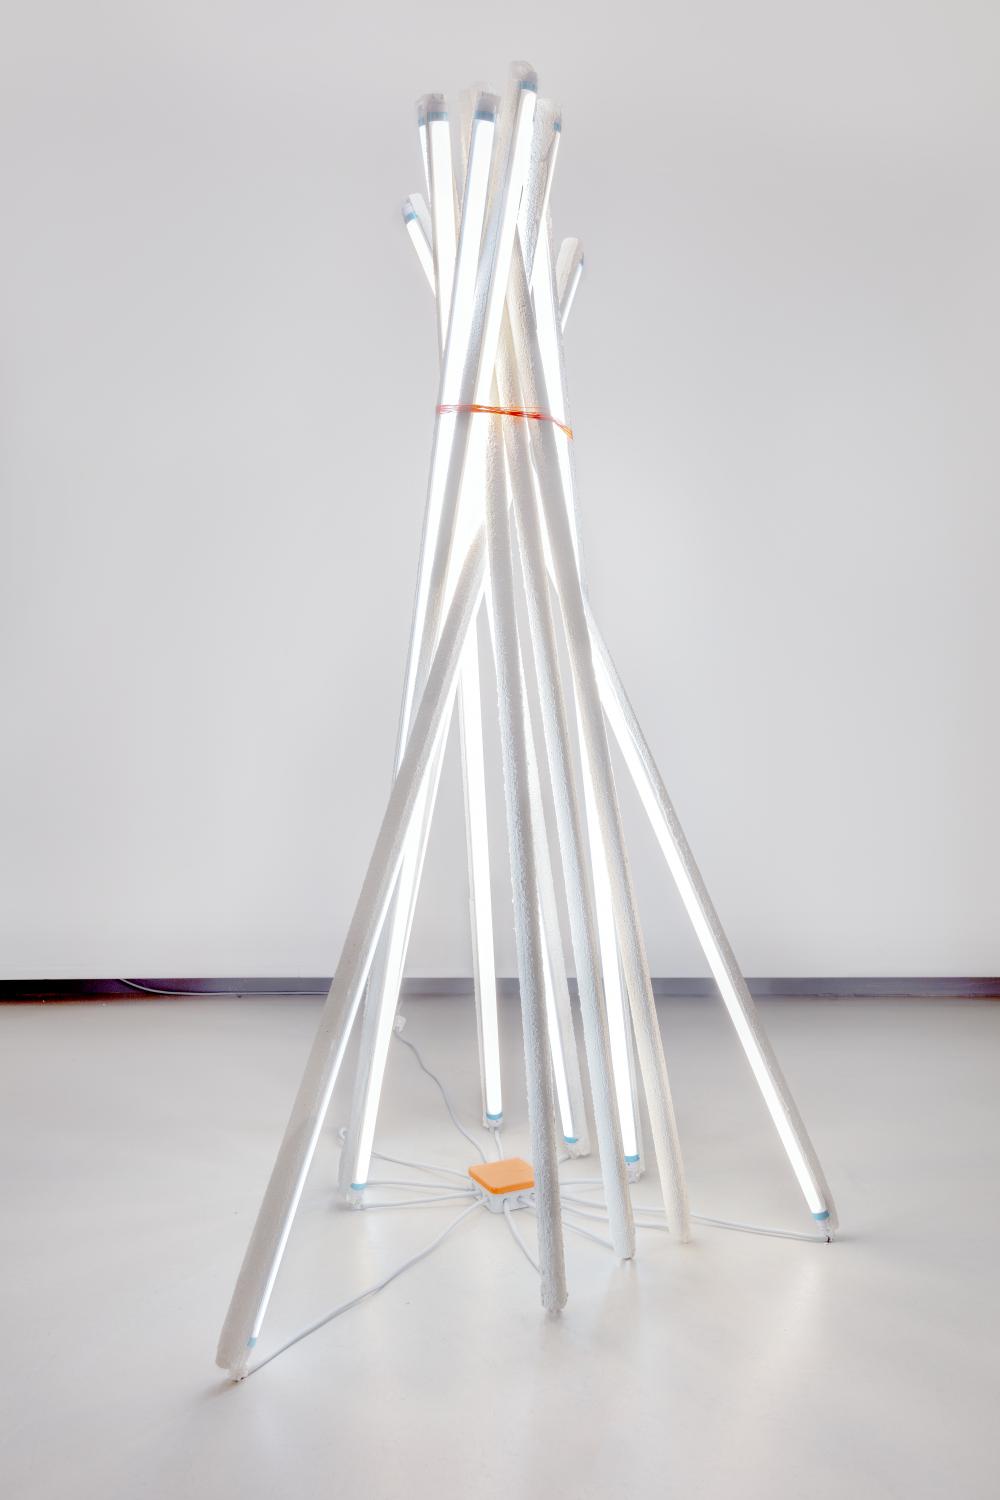 Photoworks + Objects (2011-2019) - Object no. 13 2019 90 x 90 x 152 cm LED tubelights and...